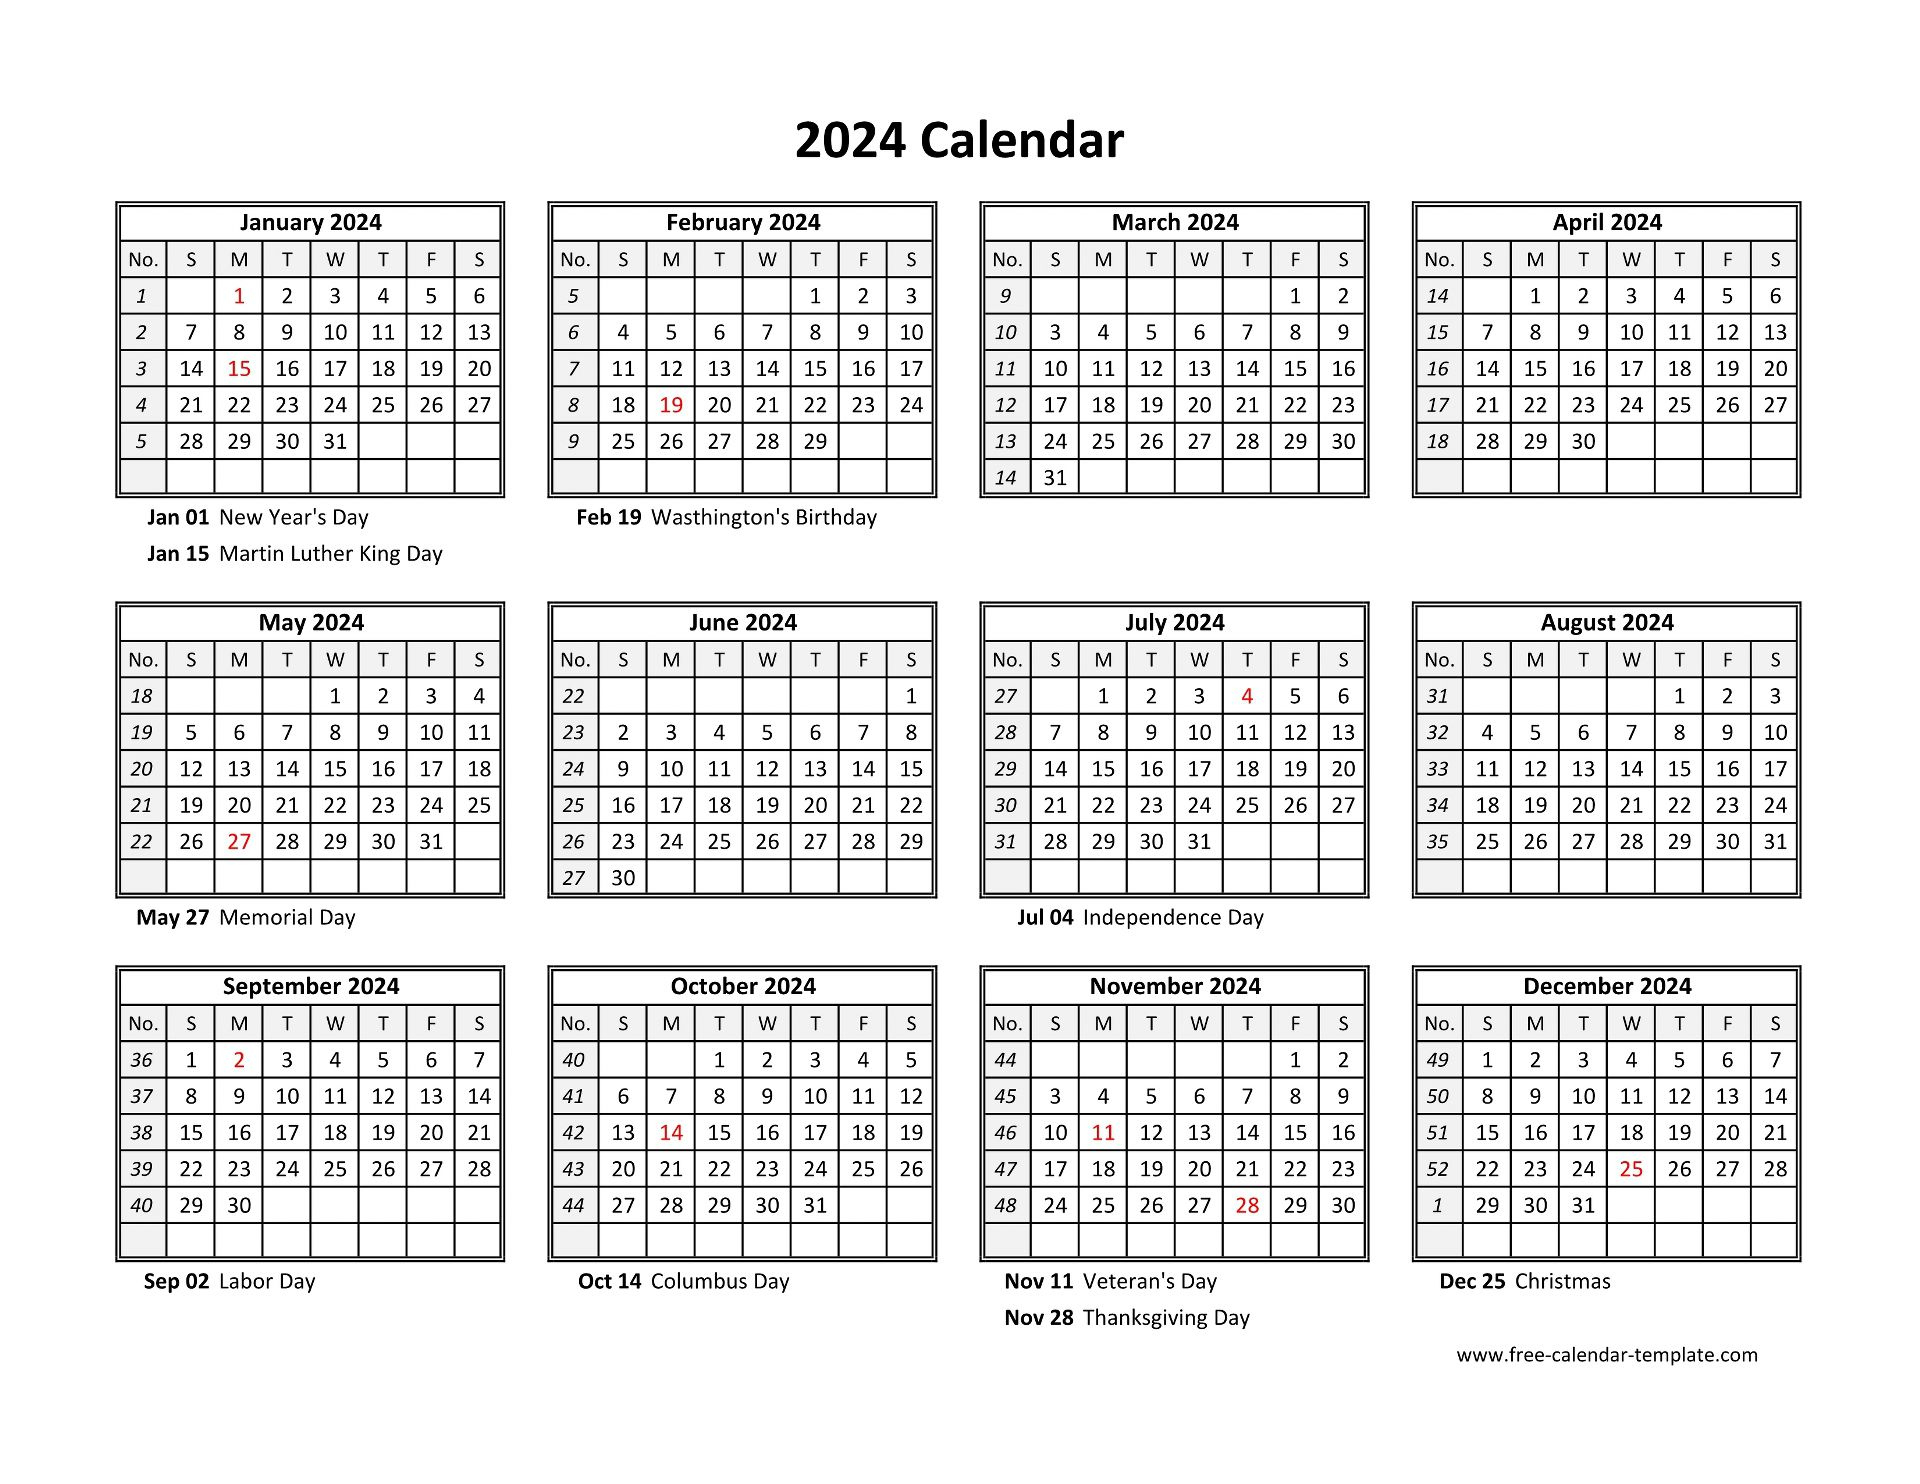 Yearly Calendar 2024 Printable With Federal Holidays | Free | 1 Year Printable Calendar 2024